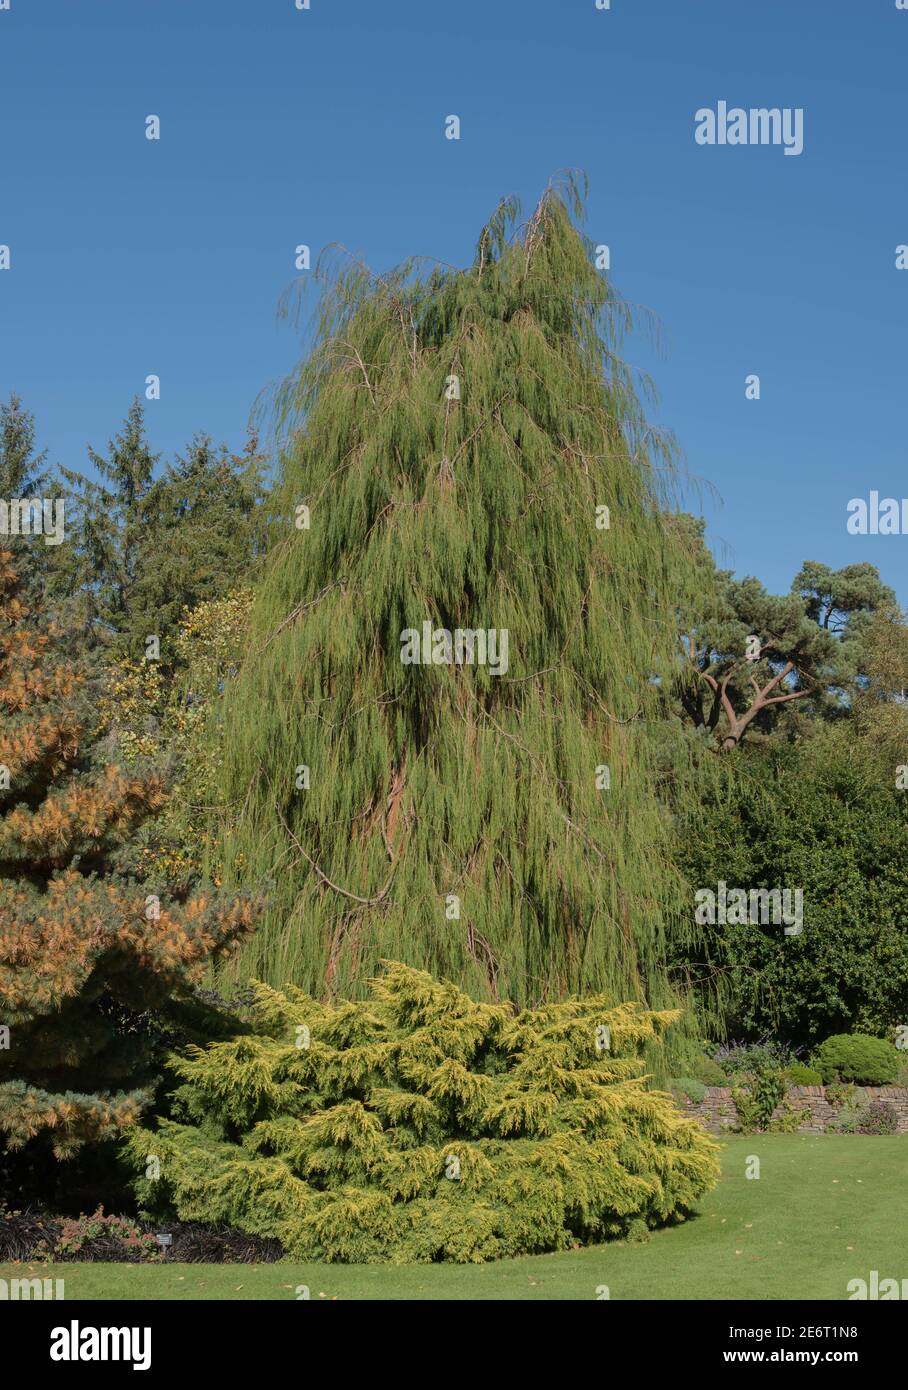 Summer Foliage of a Weeping Evergreen Lawson's Cypress Tree (Chamaecyparis lawsoniana 'Imbricata Pendula') Growing in a Garden with a Blue Sky Stock Photo